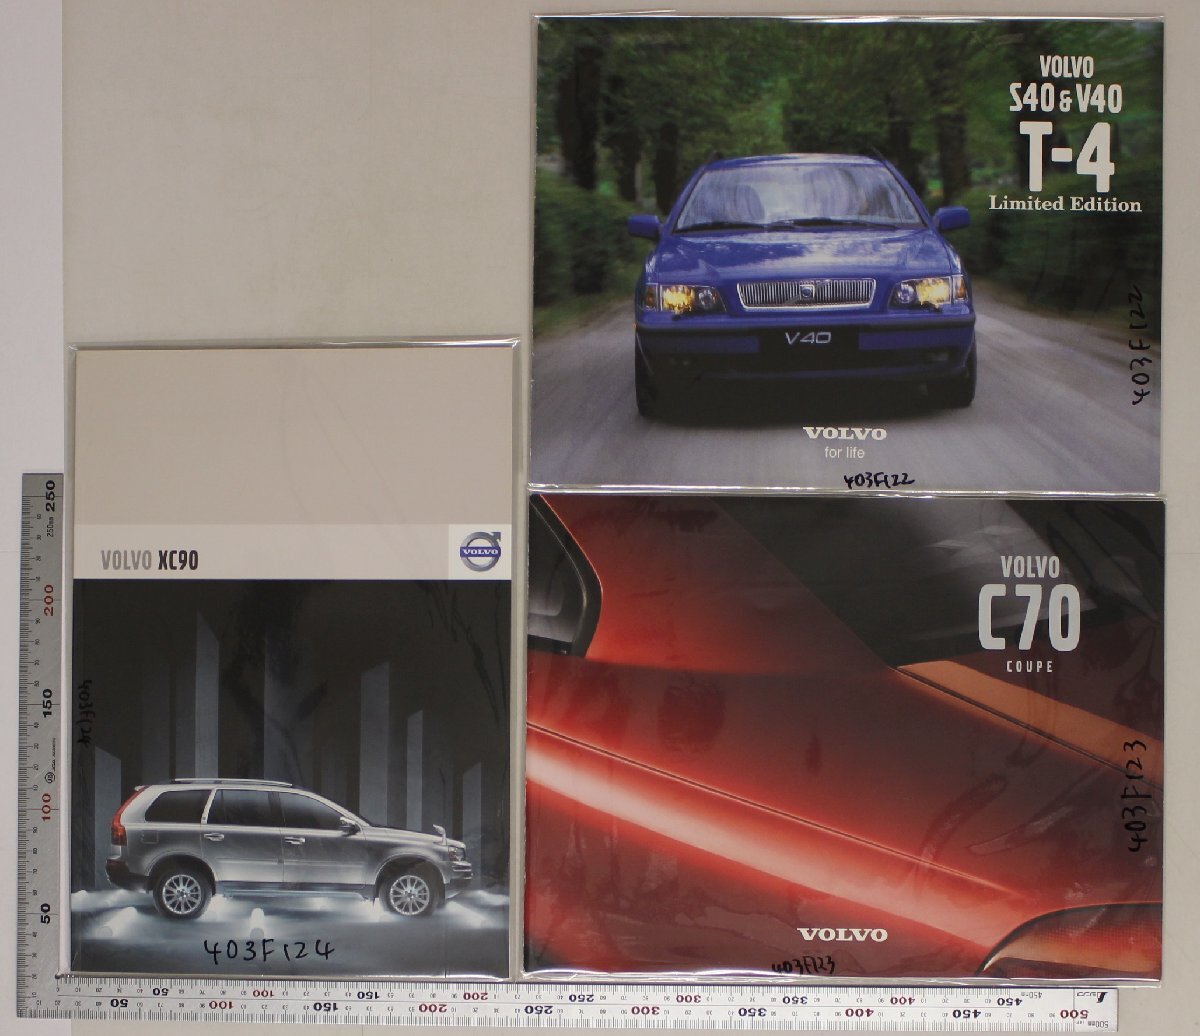  automobile catalog [ Volvo all together 14 point ]VOLVO supplementation :VOLVO S40/THE ALL-NEW VOLVO C70/VOLVO C30/VOLVO S40&V40/VOLVO S60/CLASSIC/VOLVO S80